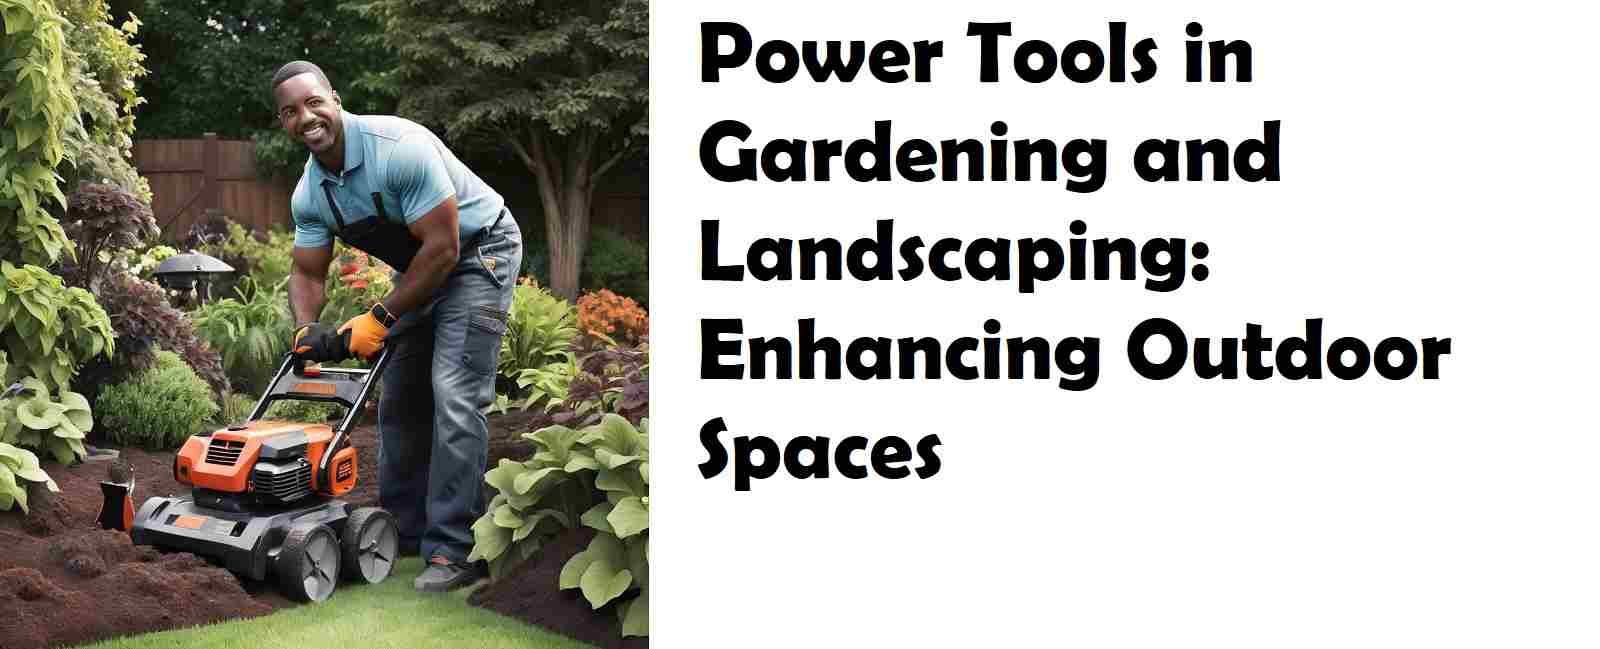 Power Tools for Gardening